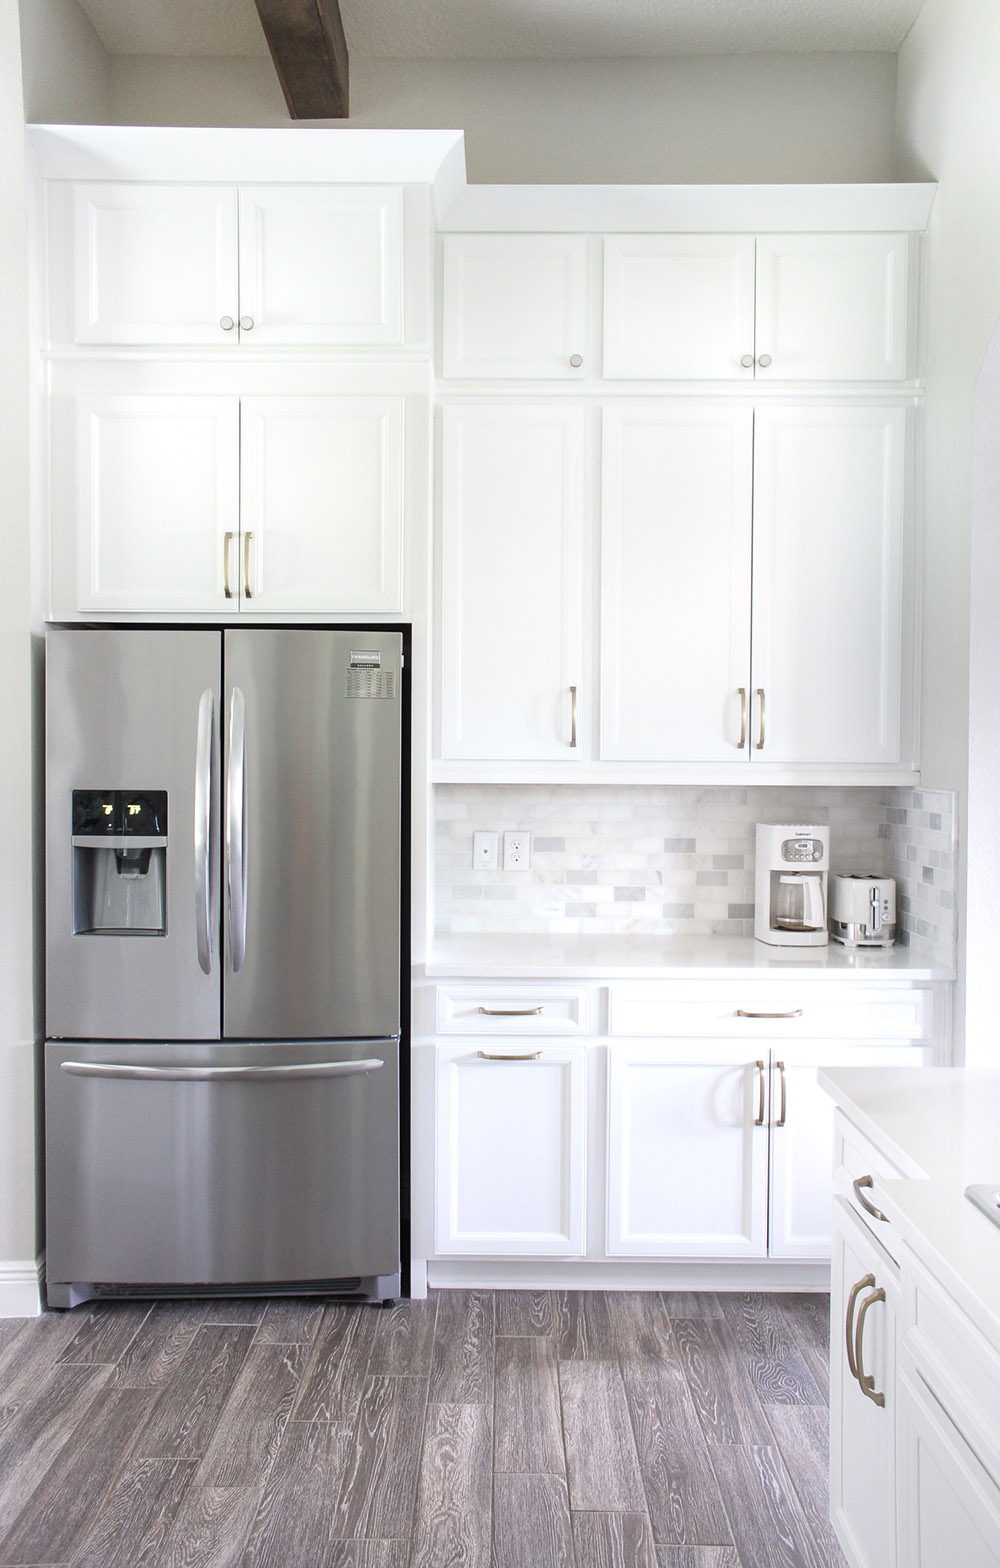 A stainless steel refrigerator sits below a wall of stacked white cabinets.